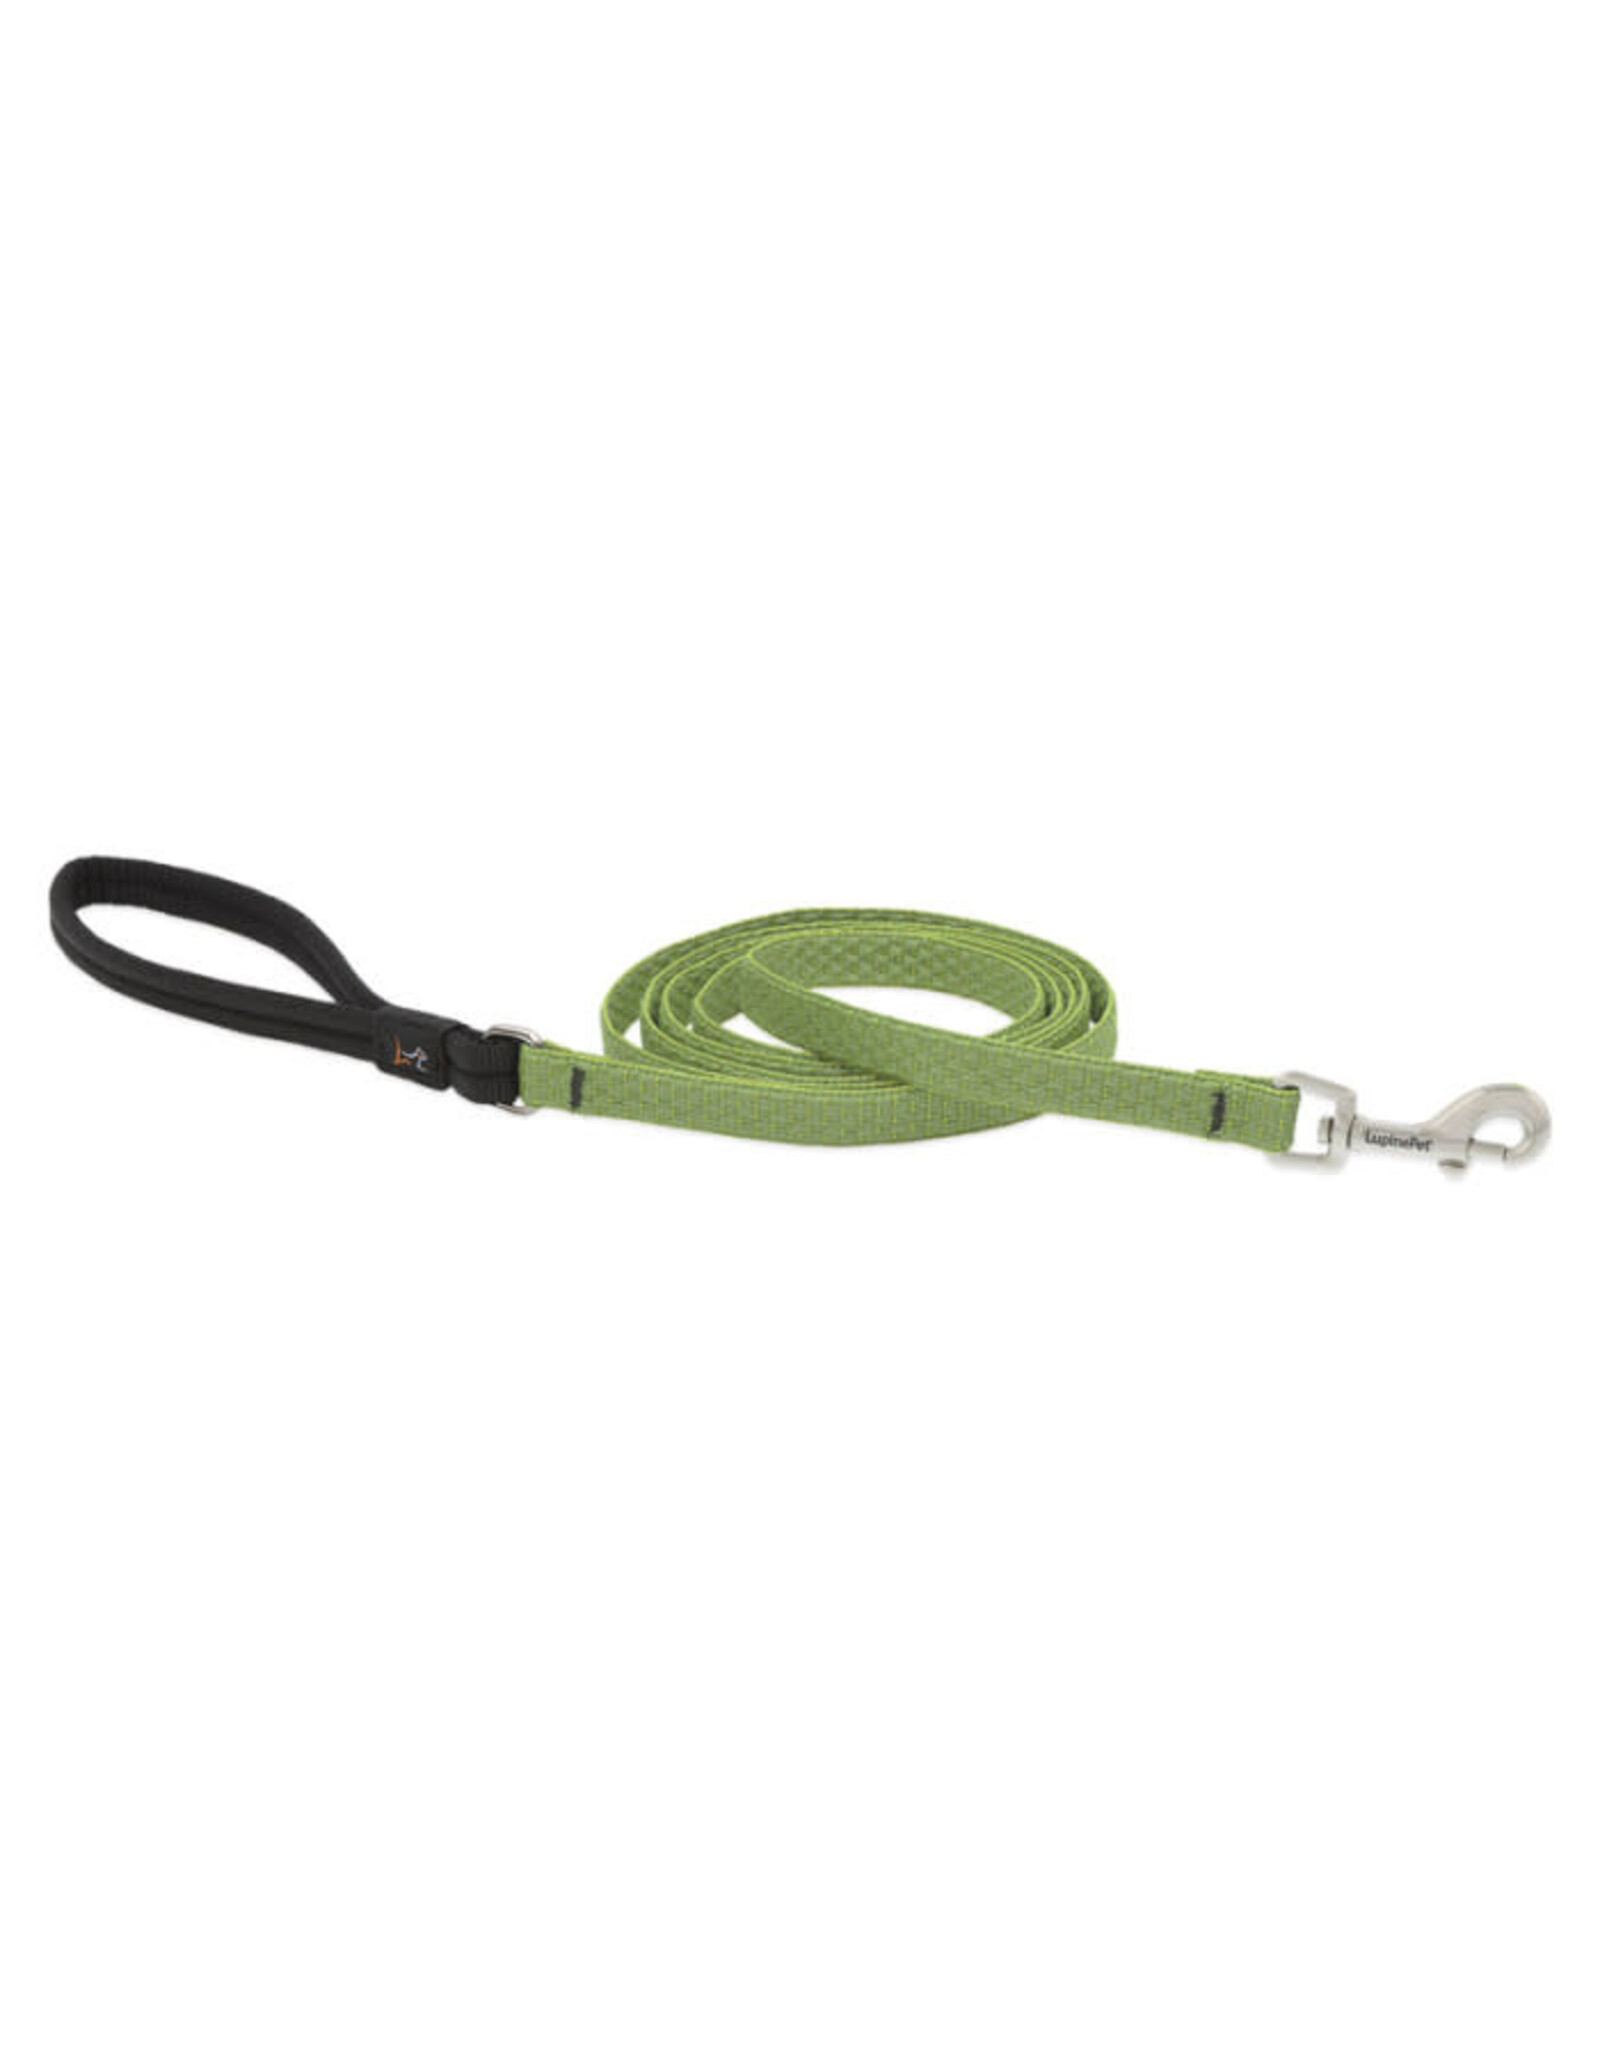 LUPINE LUPINE 1IN MOSS 4FT LEASH